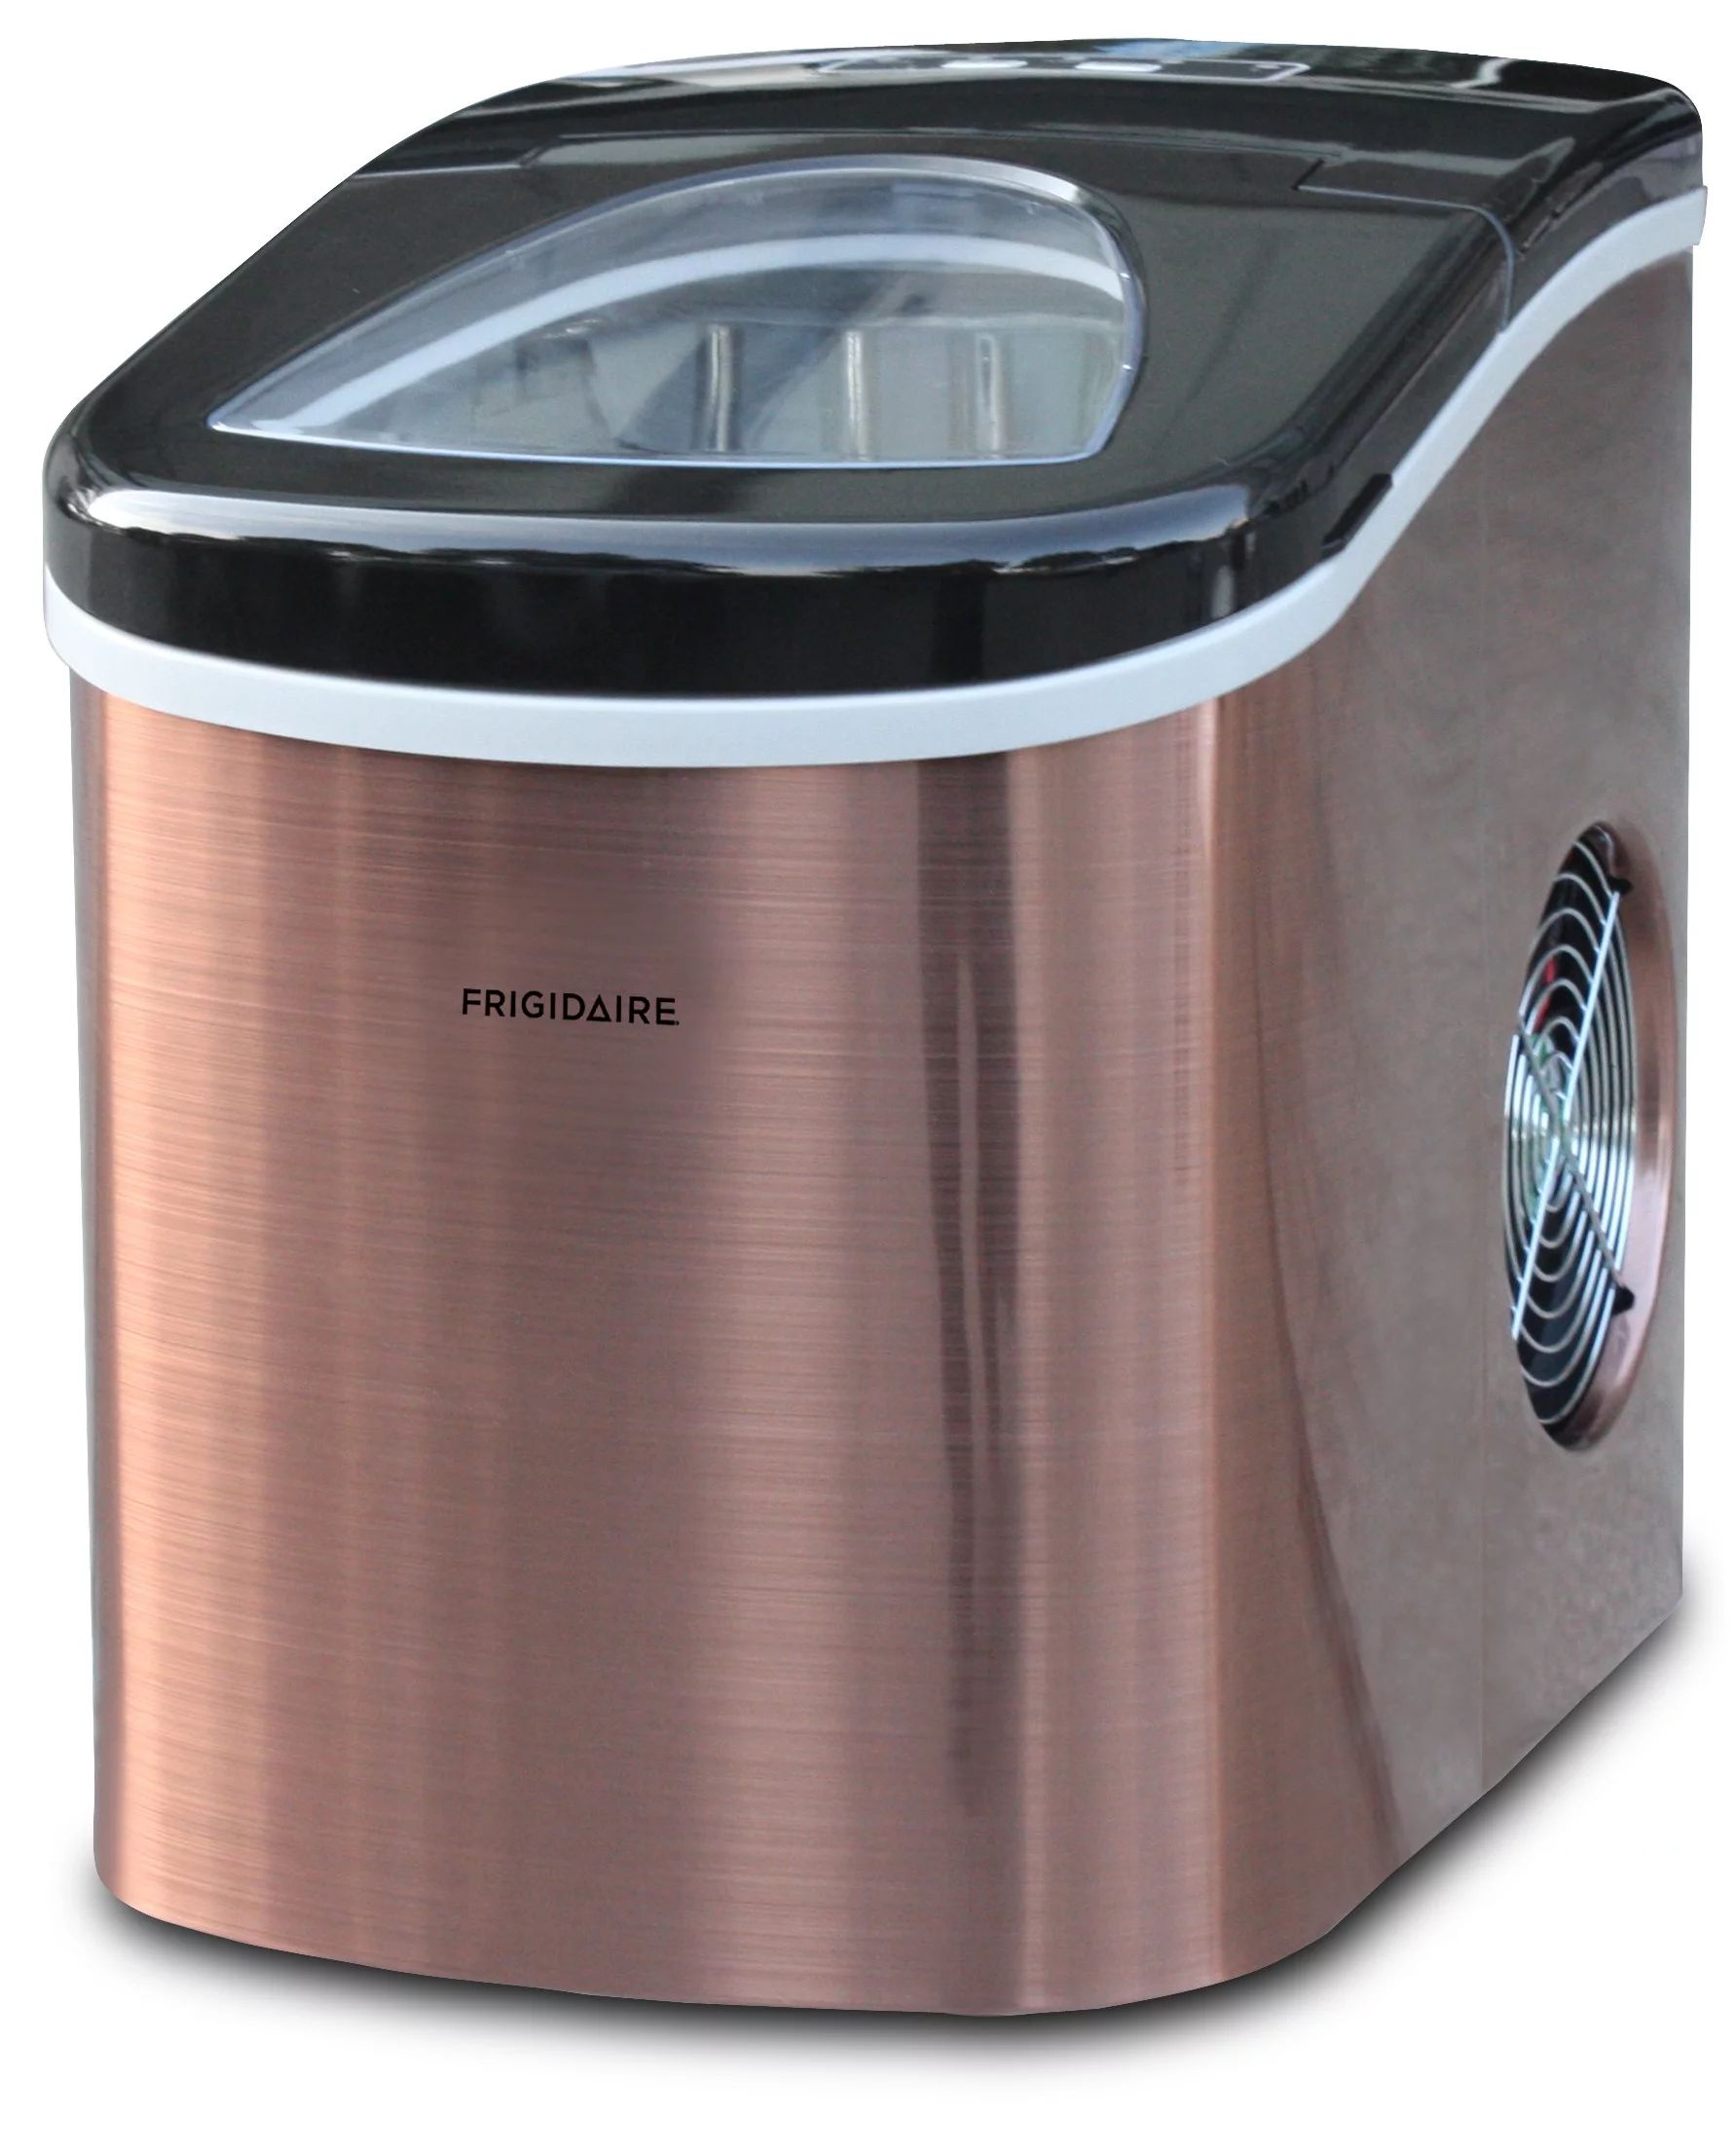 Frigidaire 26 lb. Countertop Icemaker EFIC117-SS-COPPER-COM, Copper Stainless Steel | Walmart (US)